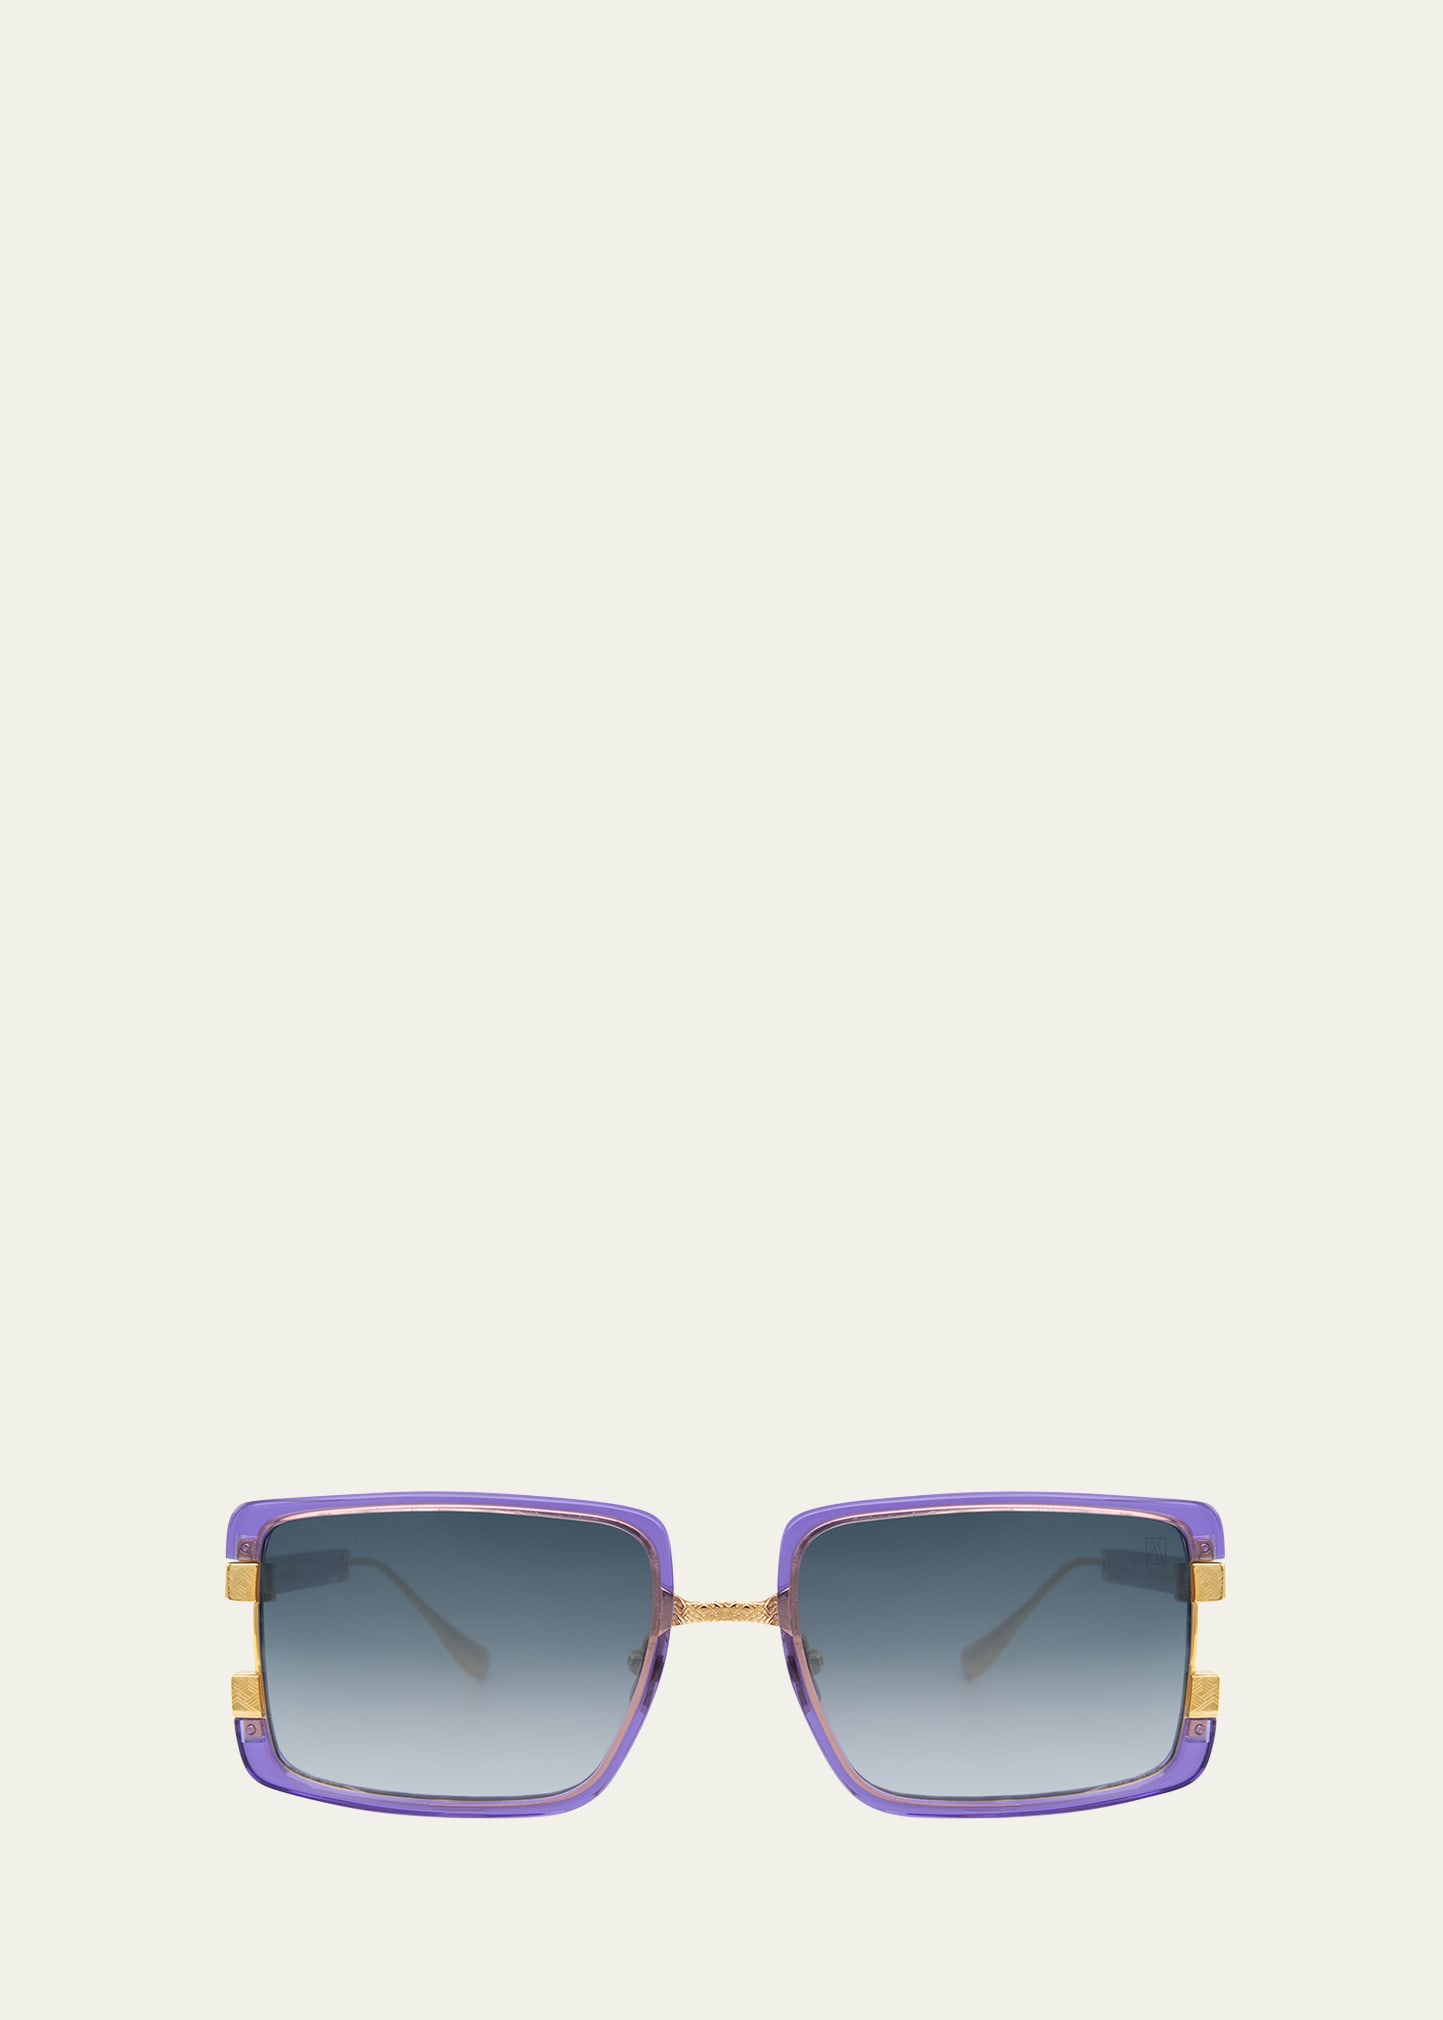 Anna-karin Karlsson Too Handsome Mixed-media Rectangle Sunglasses In Purple